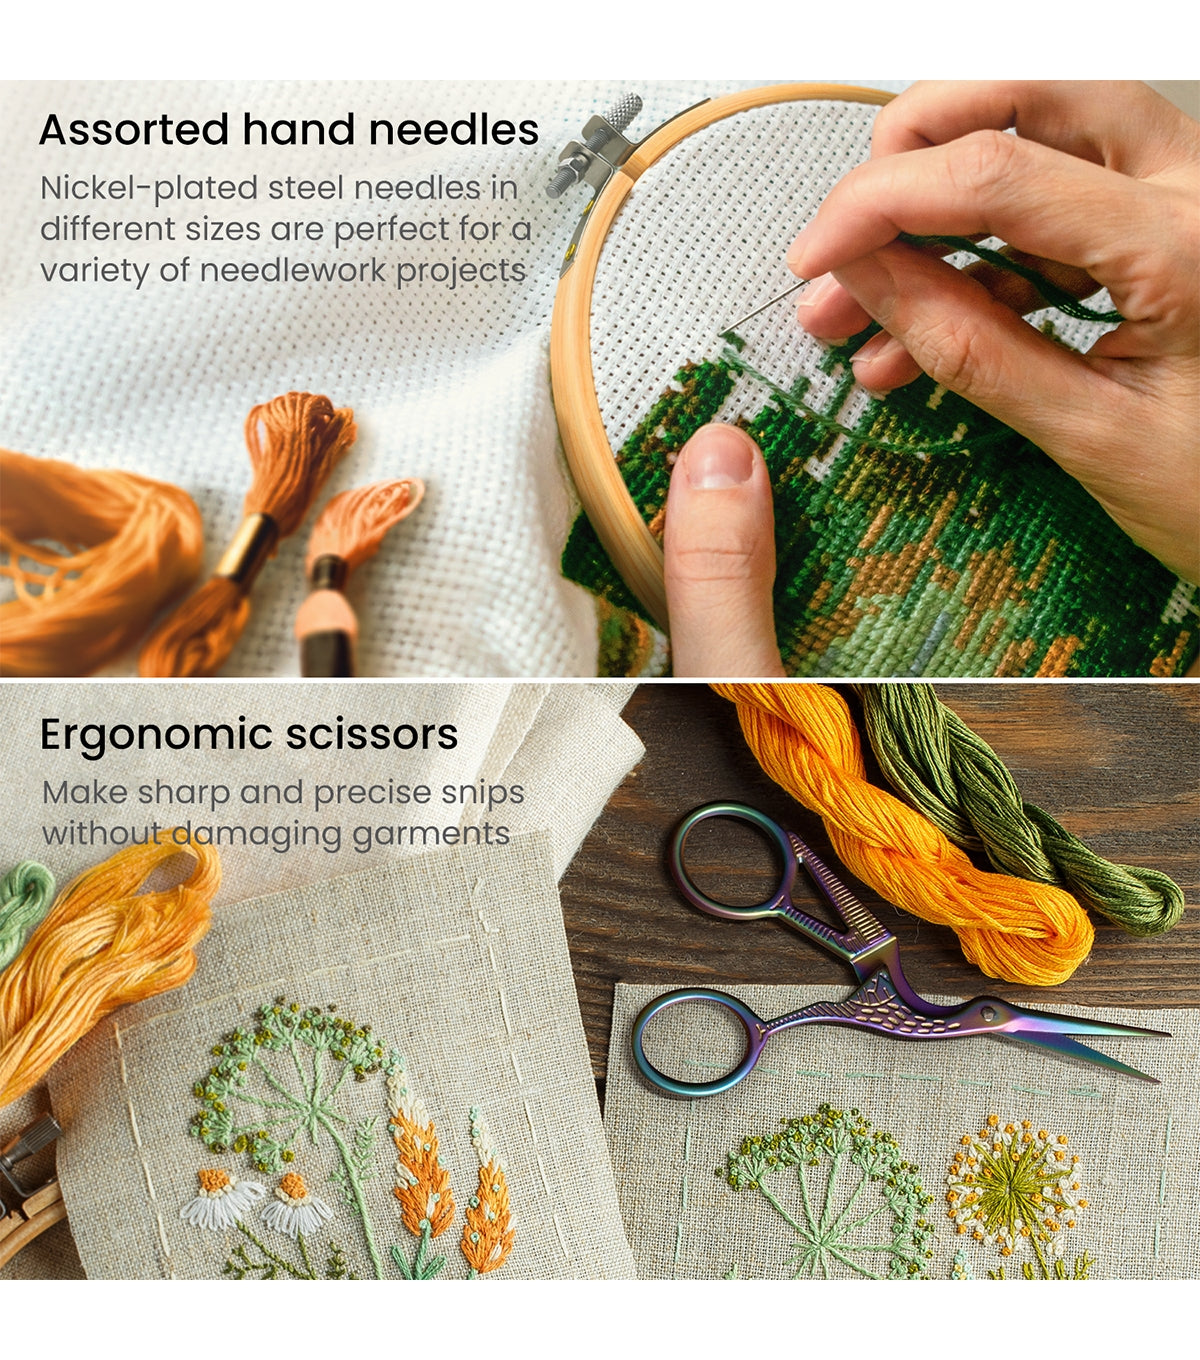 Embroidery Accessories for a Variety of Colors, Such As Yarn